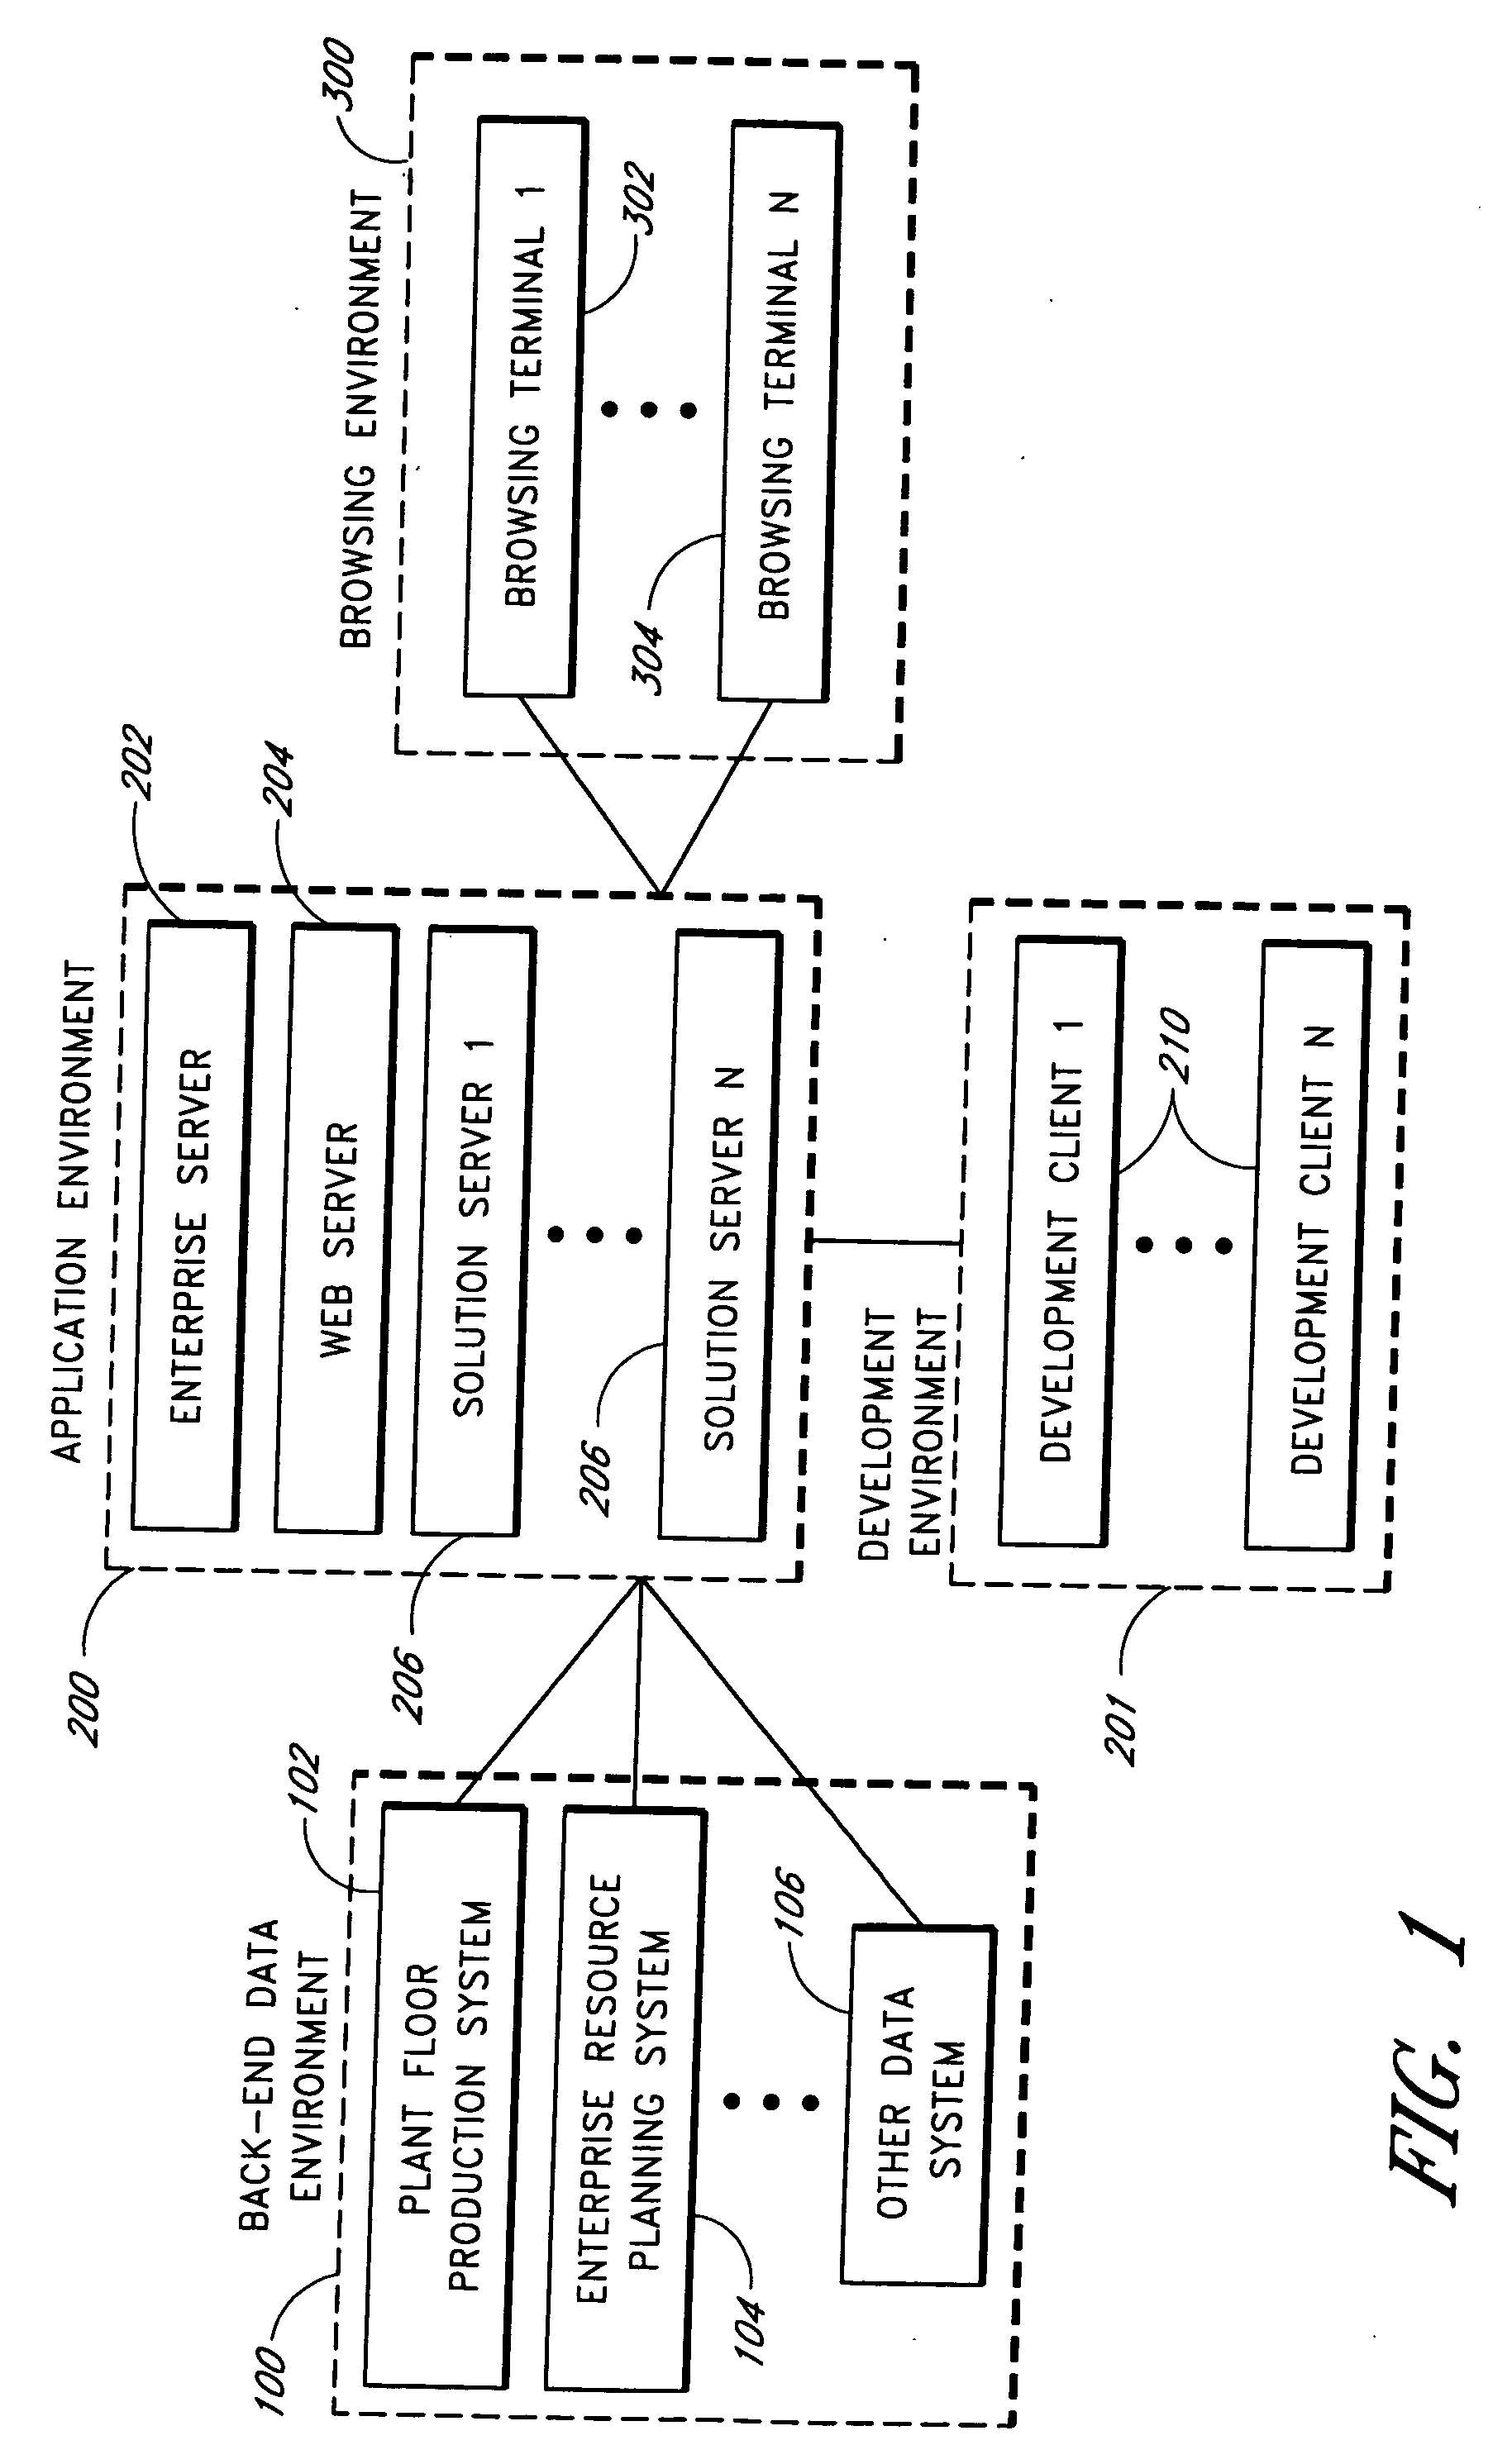 Modeling system for retrieving and displaying data from multiple sources